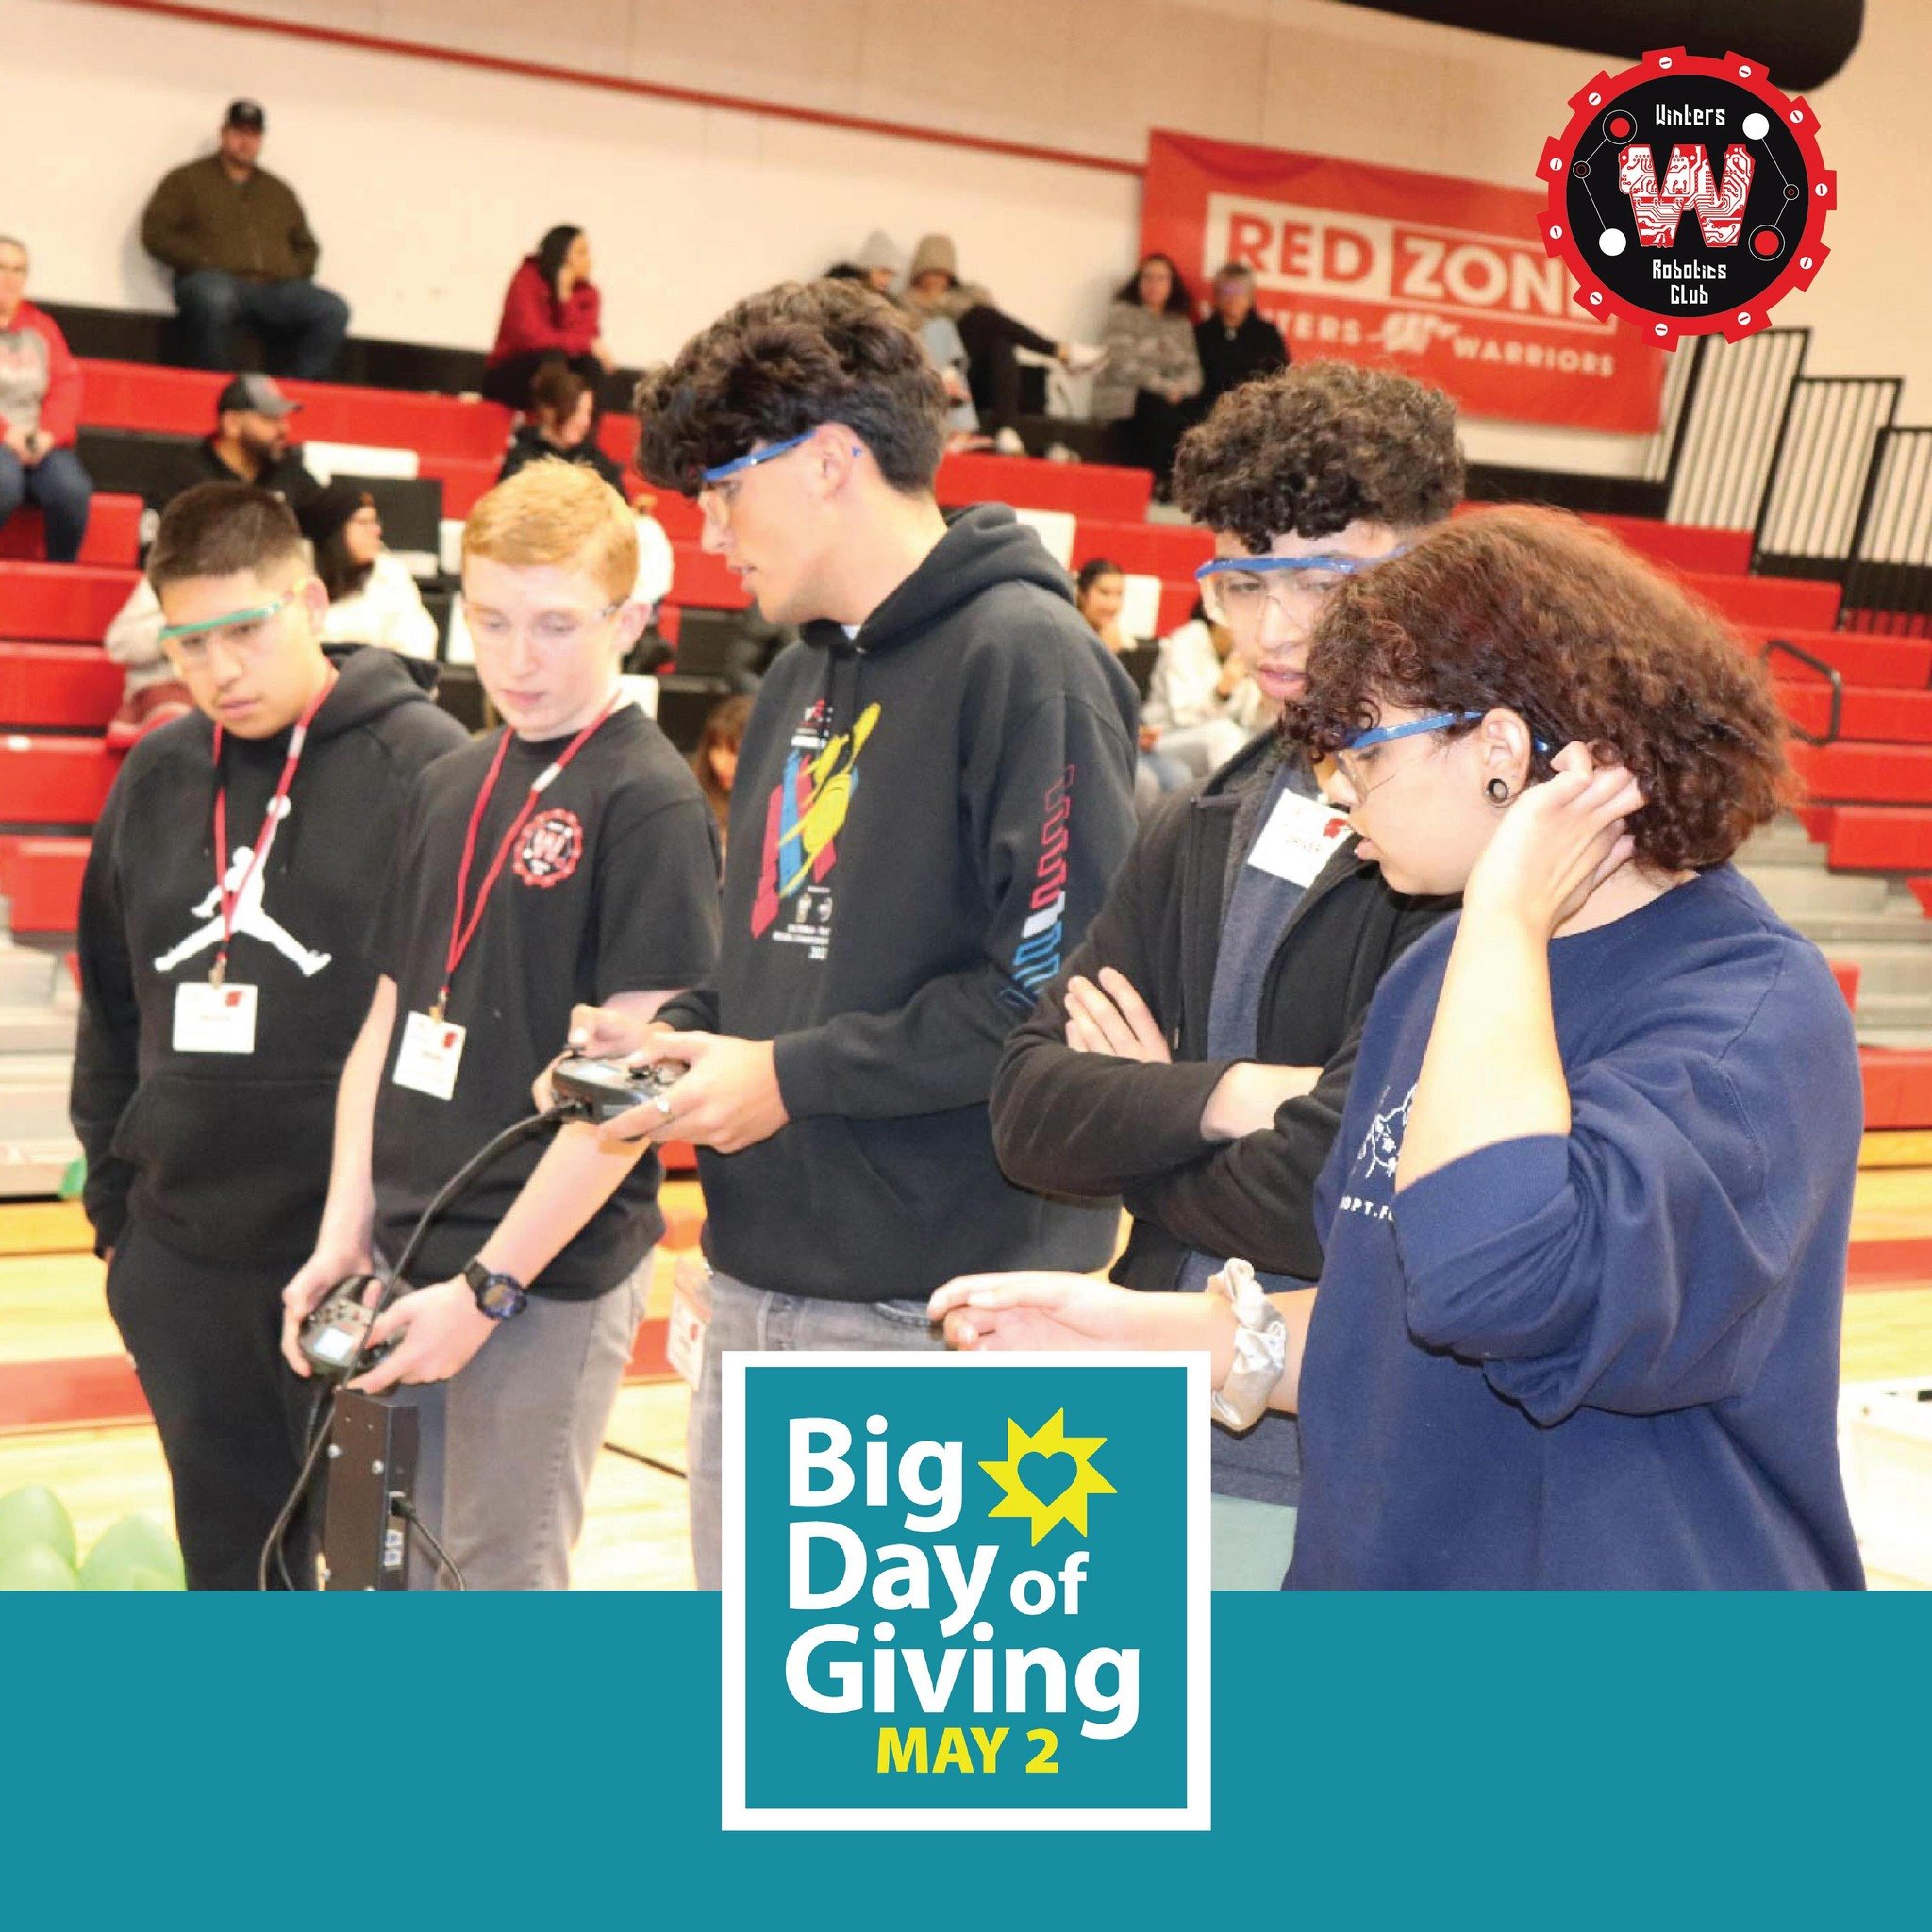 Your generous support helps the Winters Robotics Club purchase items like fields and game elements, which they use both to practice and to compete when they host local tournaments attended by teams from around the region. This pic is from one of our 